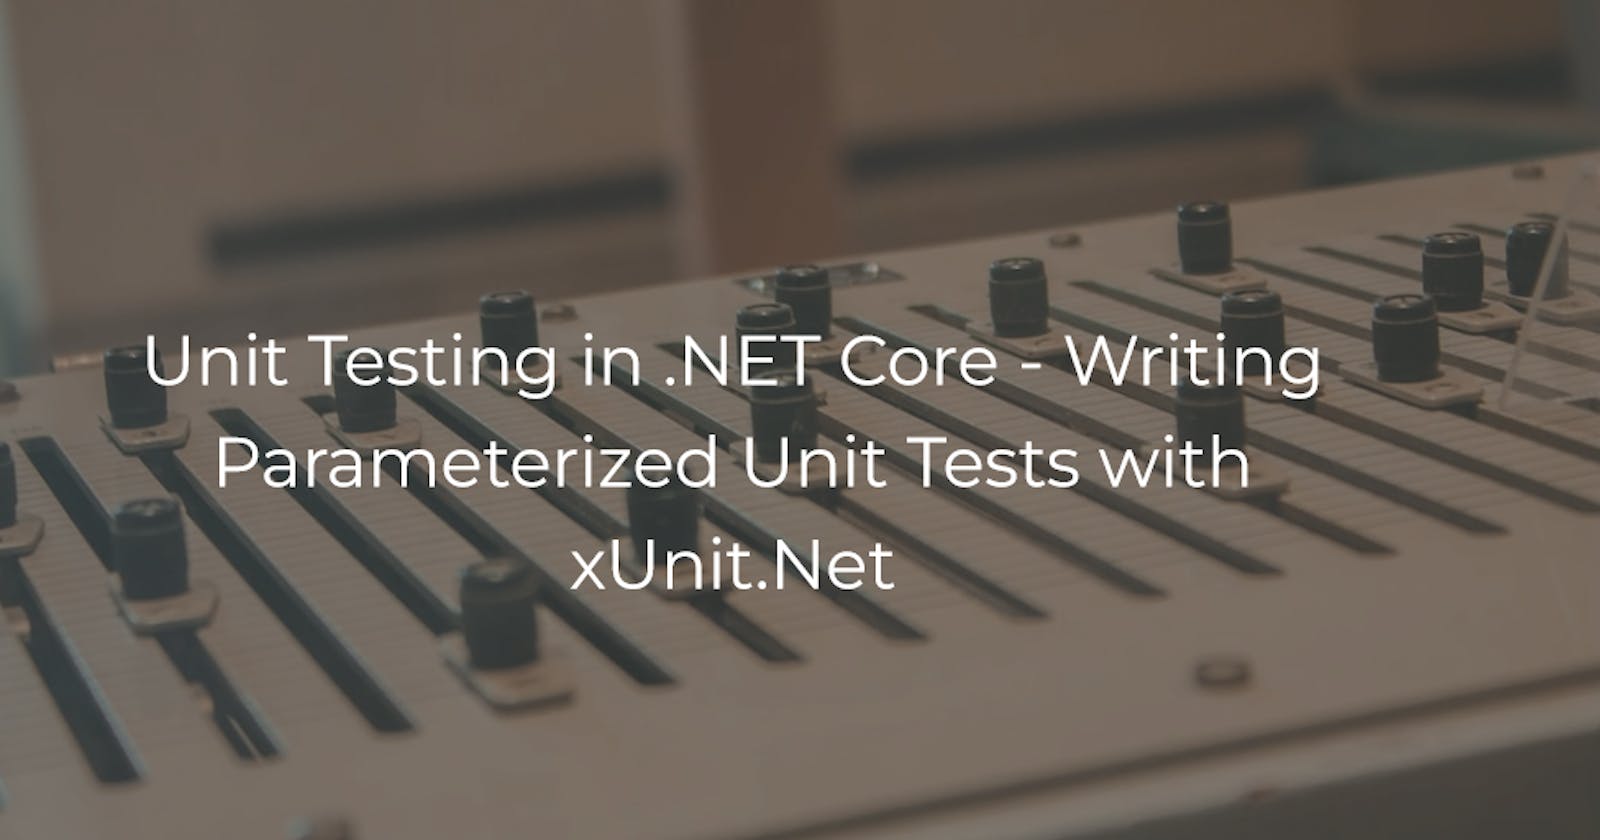 Unit Testing in .NET Core - Writing Parameterized Unit Tests with xUnit